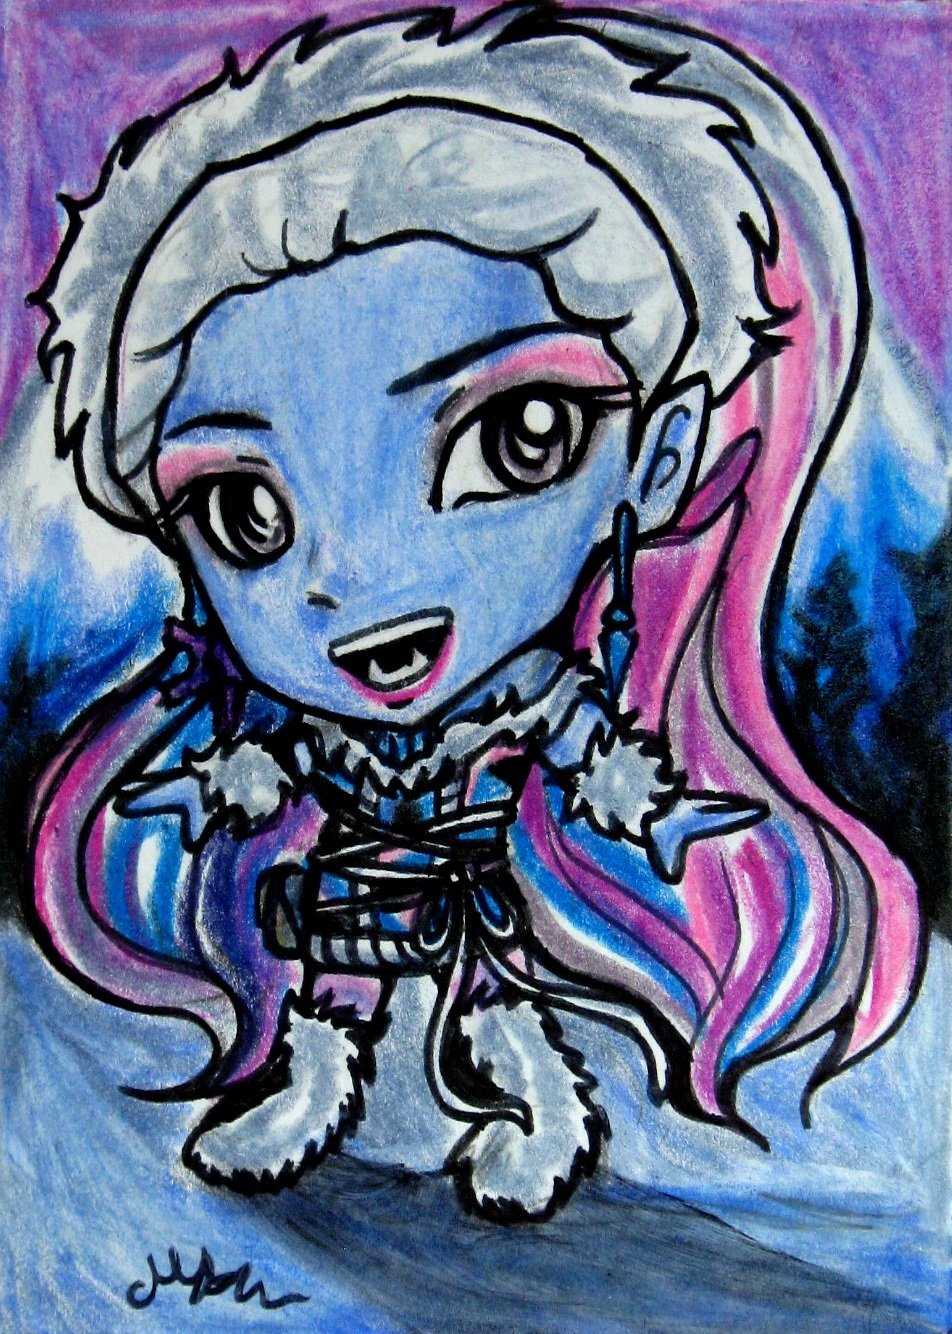 Monster High Abbey Bominable Japanese Anime Original Sketch Card Drawing ACEO PSC 1/1 Maia